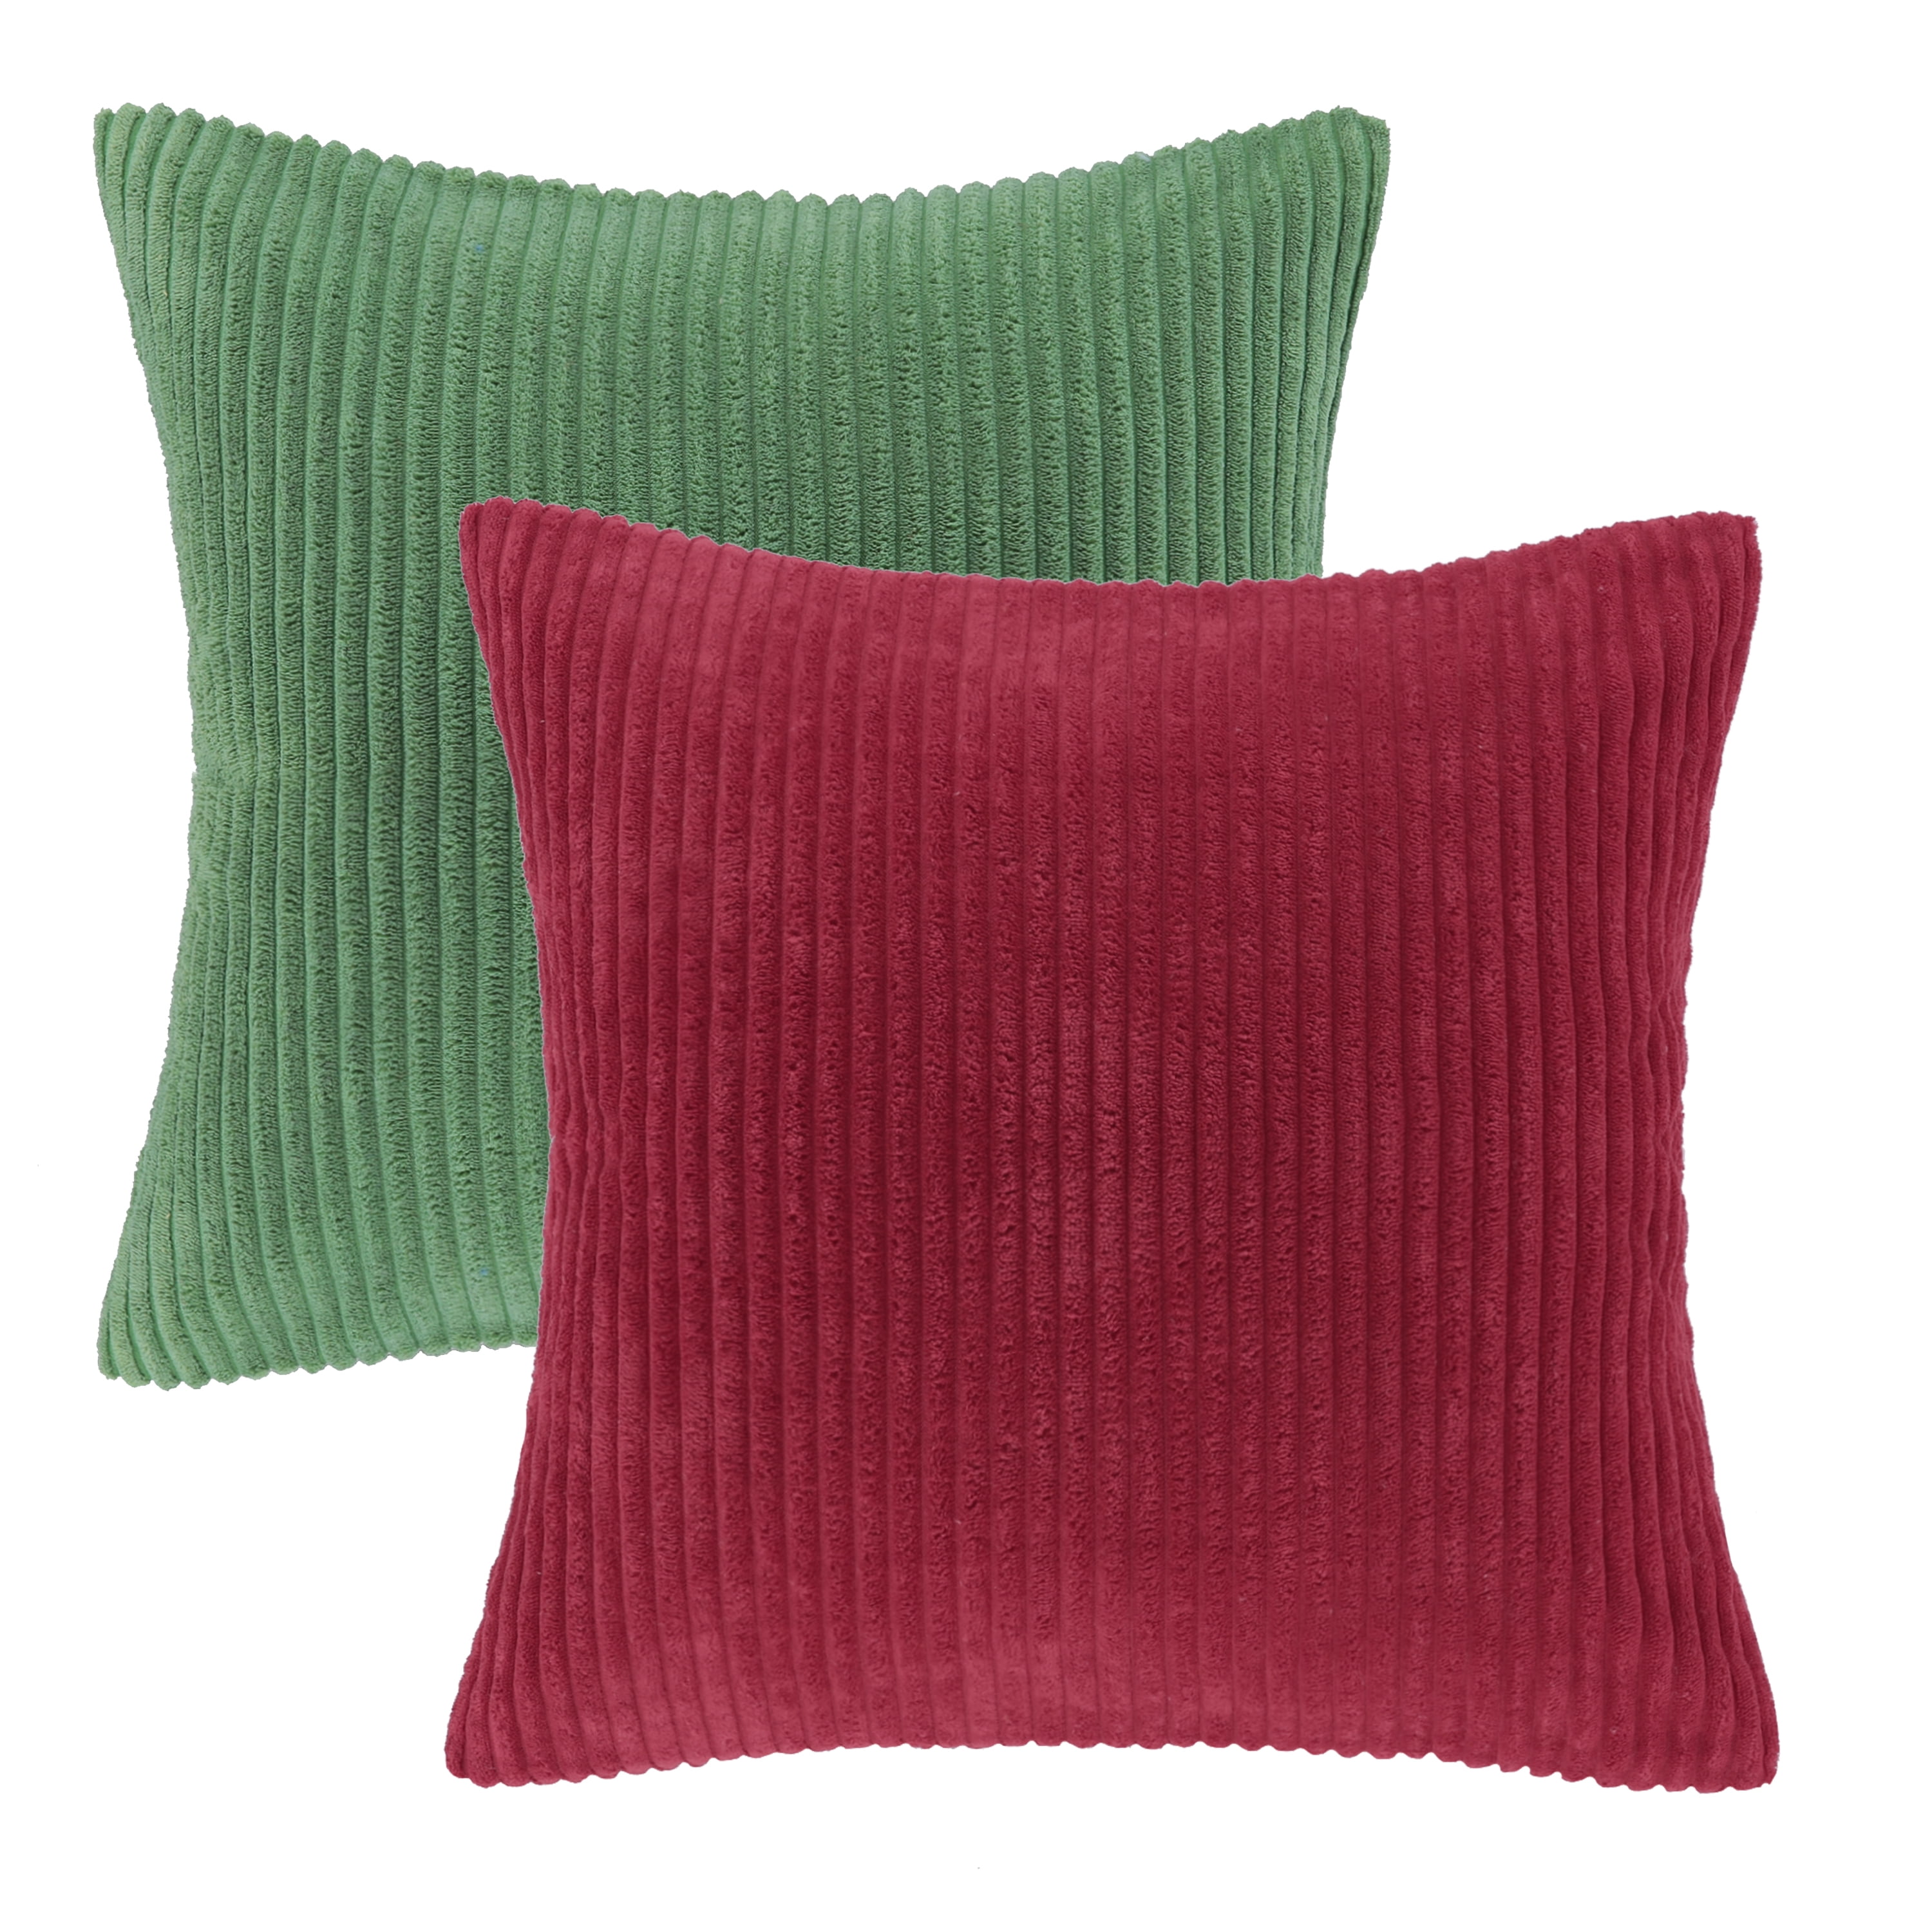 Chic Pink Corduroy Striped Velvet Throw Pillows - 18x18 - 2 Pack -  Polyester